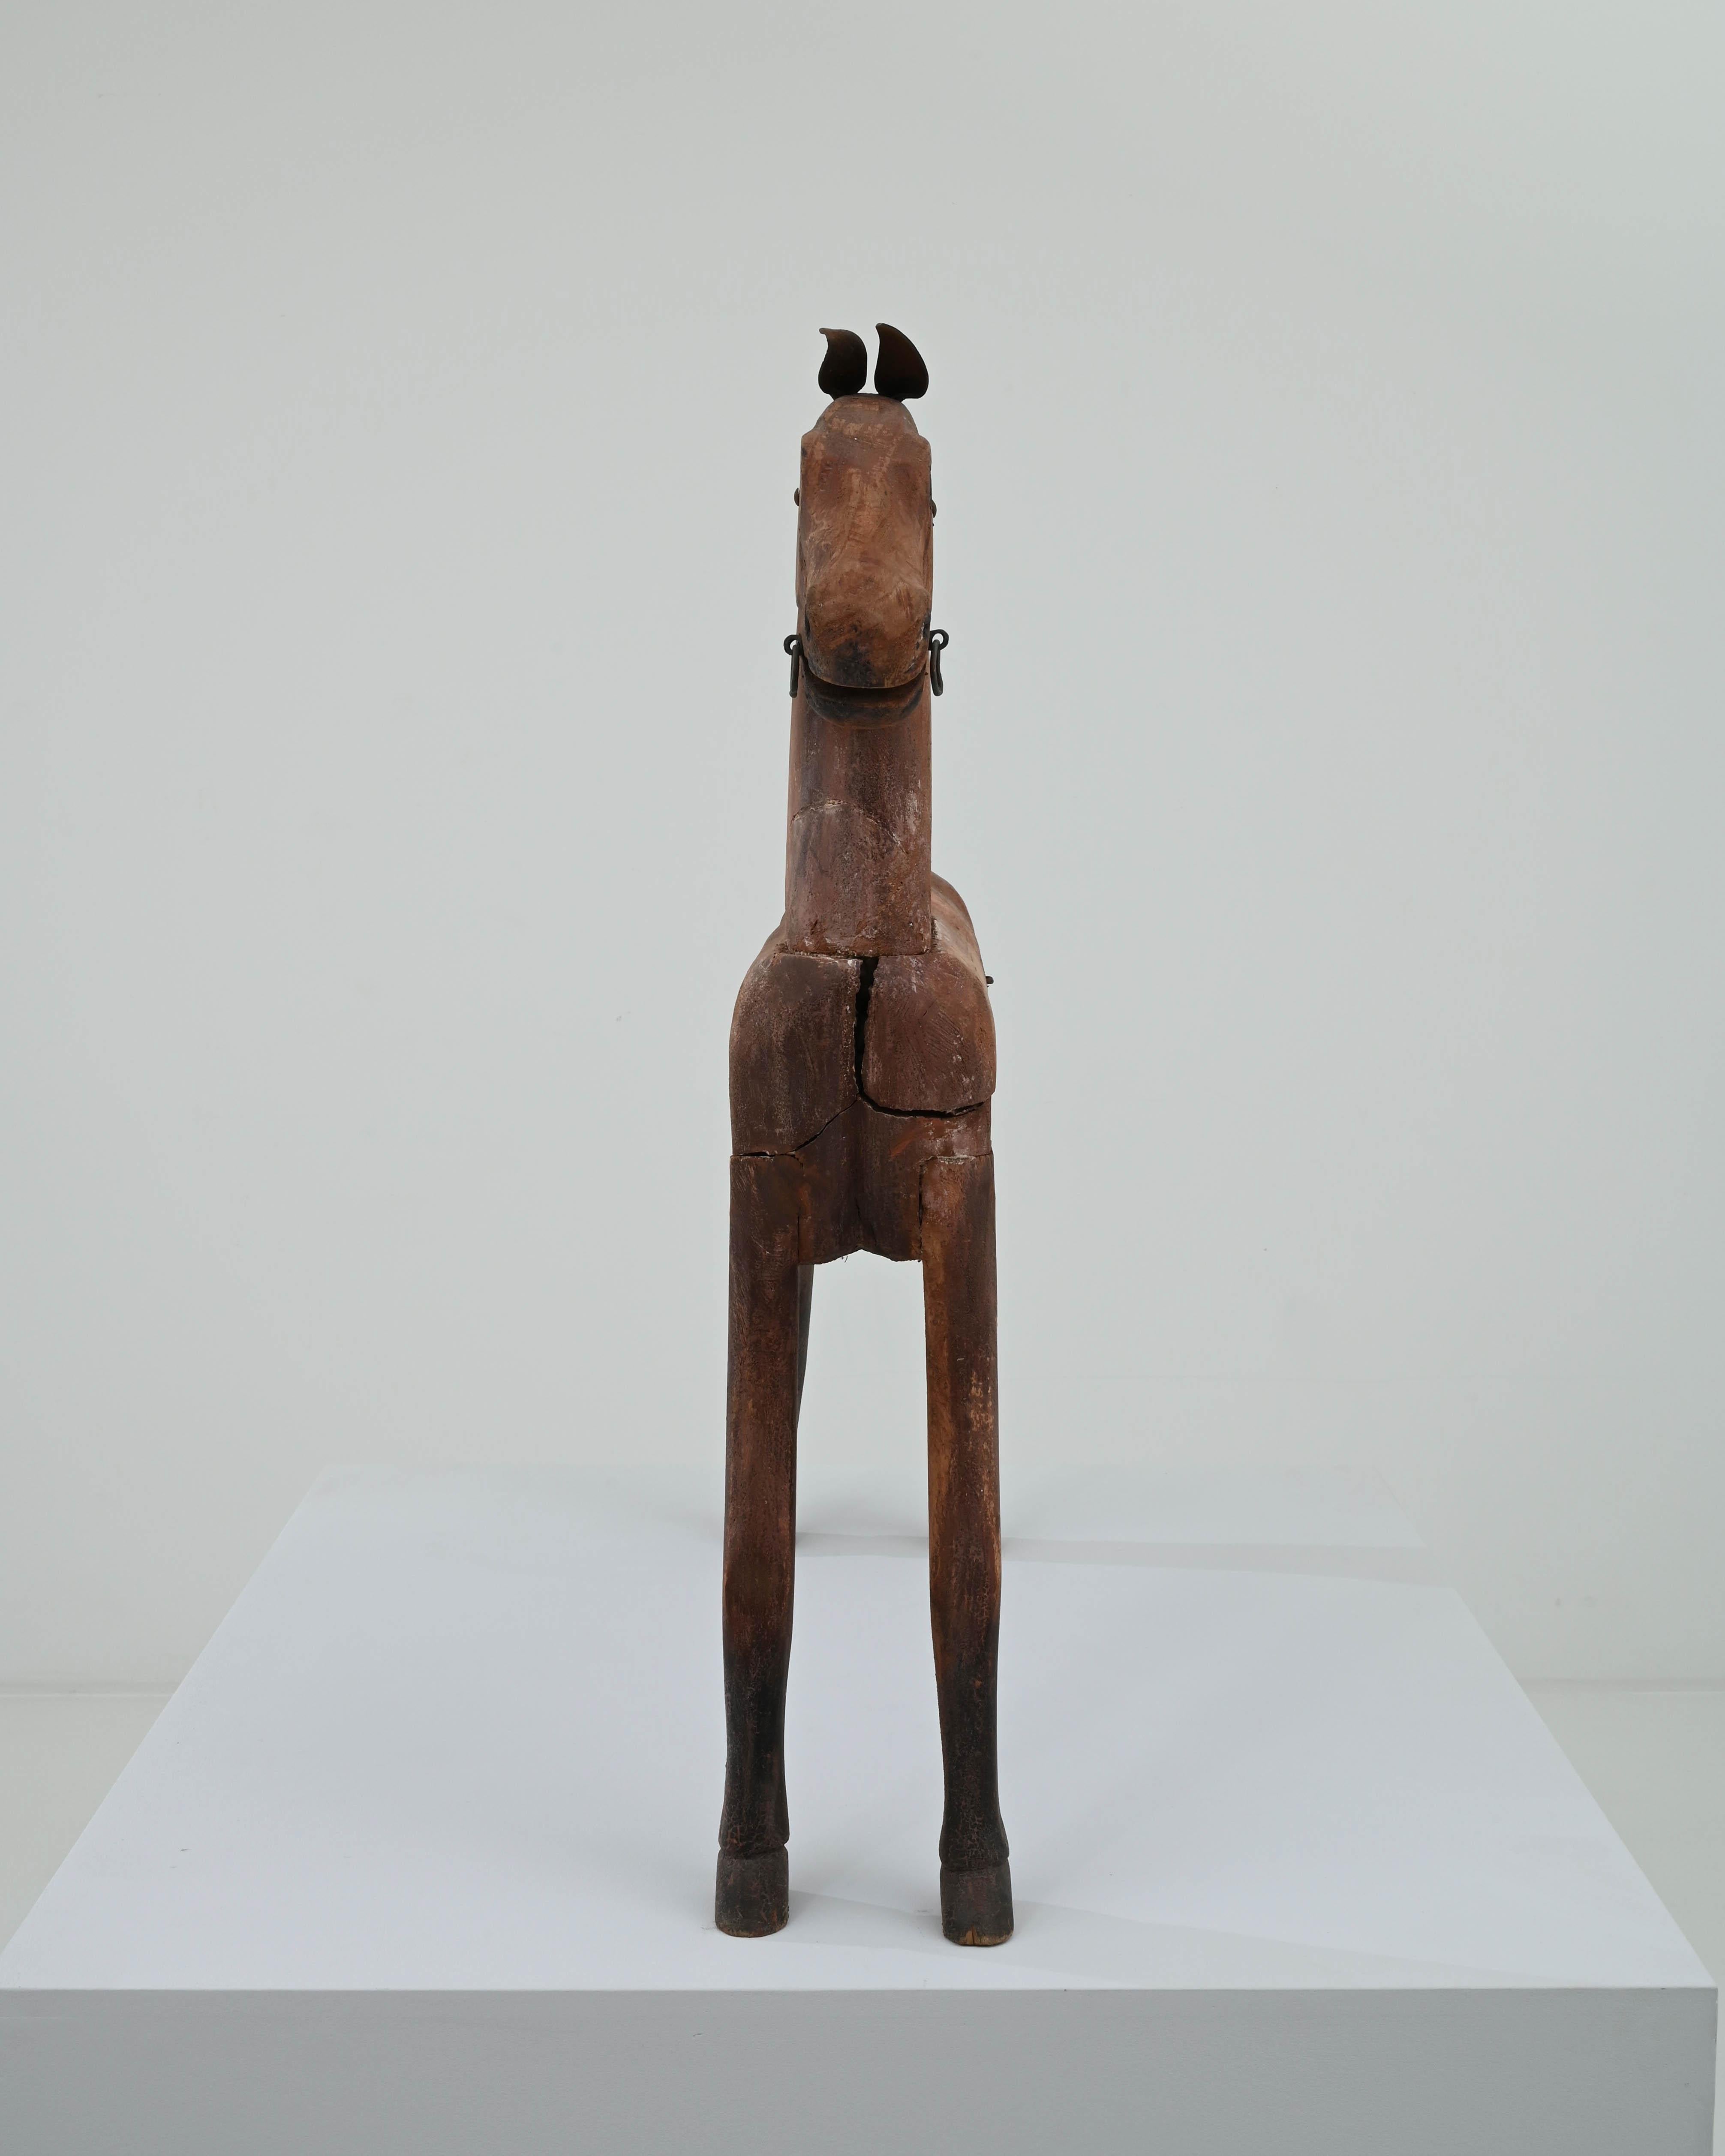 Likely intended as a children’s toy, this vintage wooden horse has a beautiful sculptural quality. Made in Scandinavia in the 20th century, the rough joints of the form give it a rustic character, while the graceful contours of the legs and